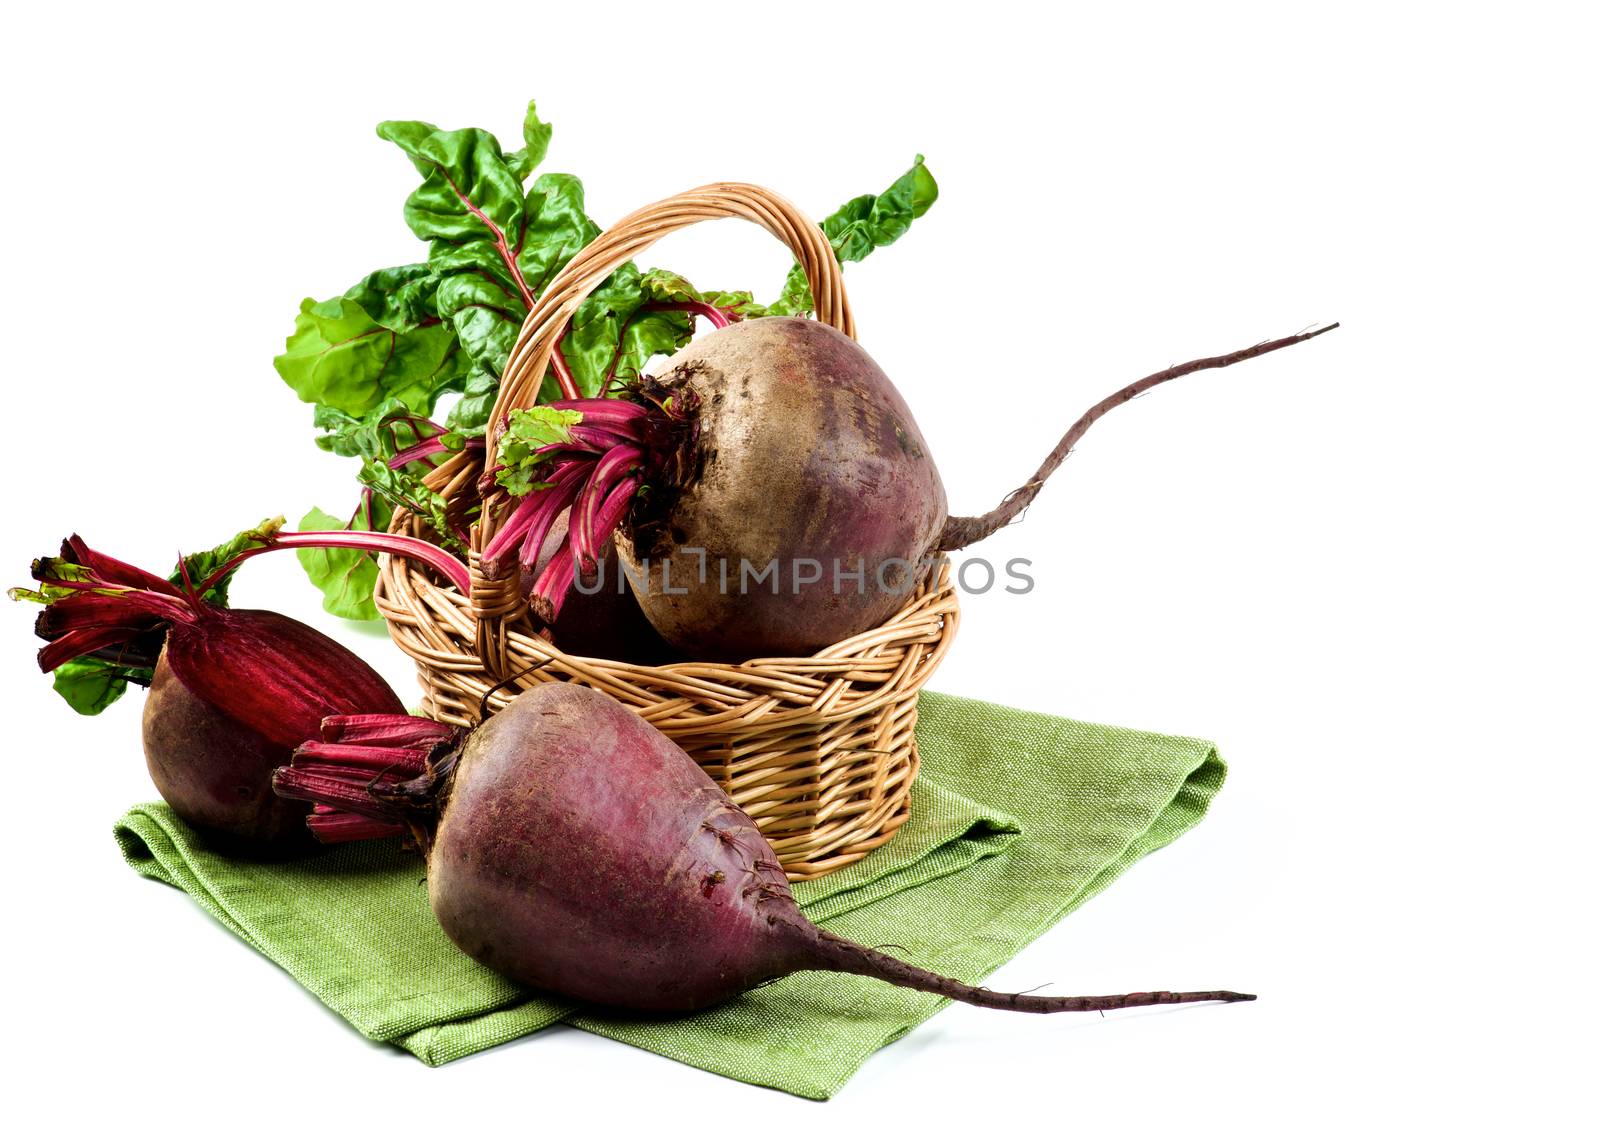 Arrangement of Full Body and Half of Fresh Raw Organic Beet Roots with Green Beet Tops in Wicker Basket on Napkin isolated on White background